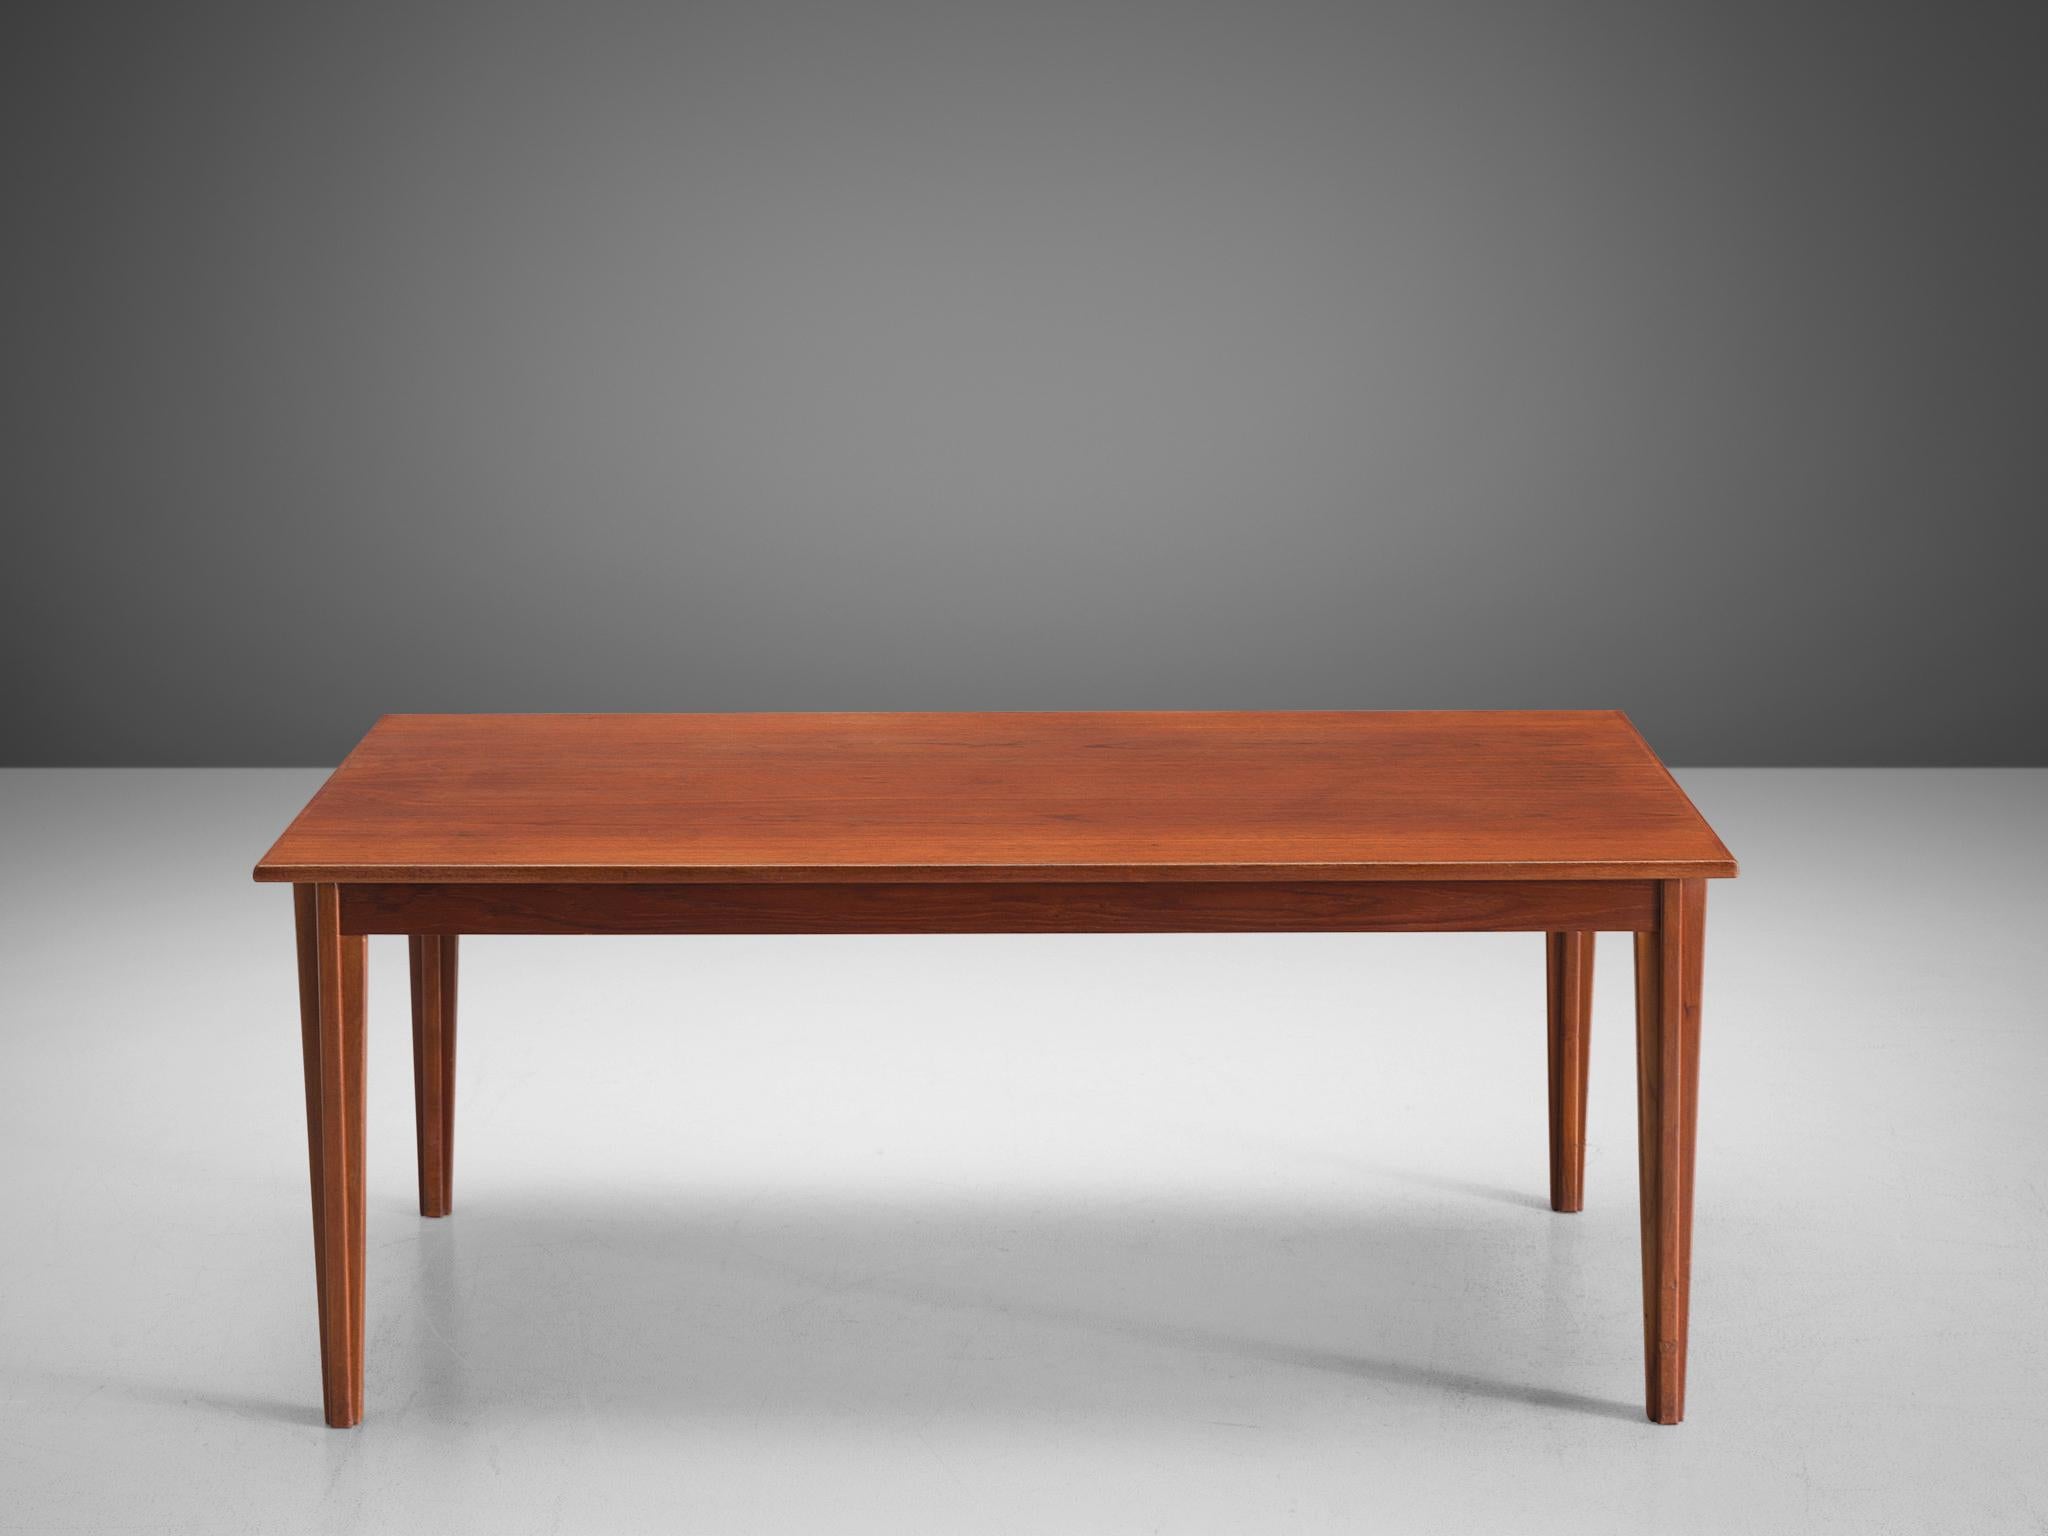 Dining table, teak, Denmark, 1960s.

Beautiful sleek table. rectangular shaped top of this table displays a beautiful grain in the wood. The base consists of four legs and shows beautiful straight lines and solid wood, with classical wood-joints. A